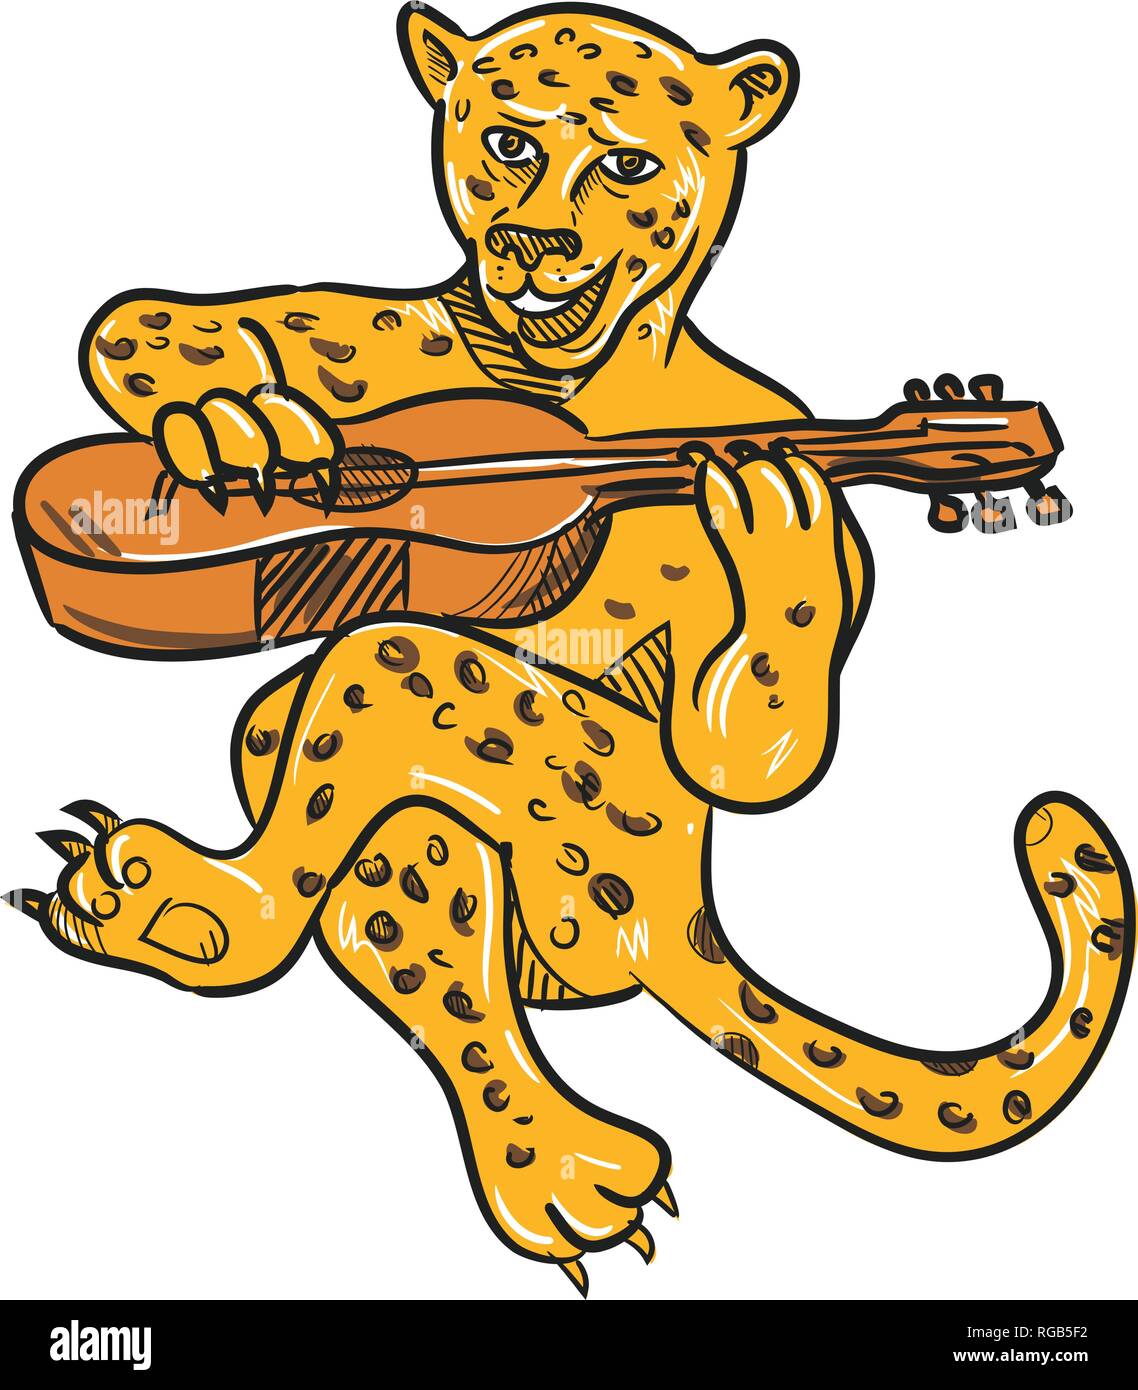 Cartoon style illustration of a happy jaguar or leopard playing an acoustic guitar while being seated or sitting down done in full color on isolated b Stock Vector